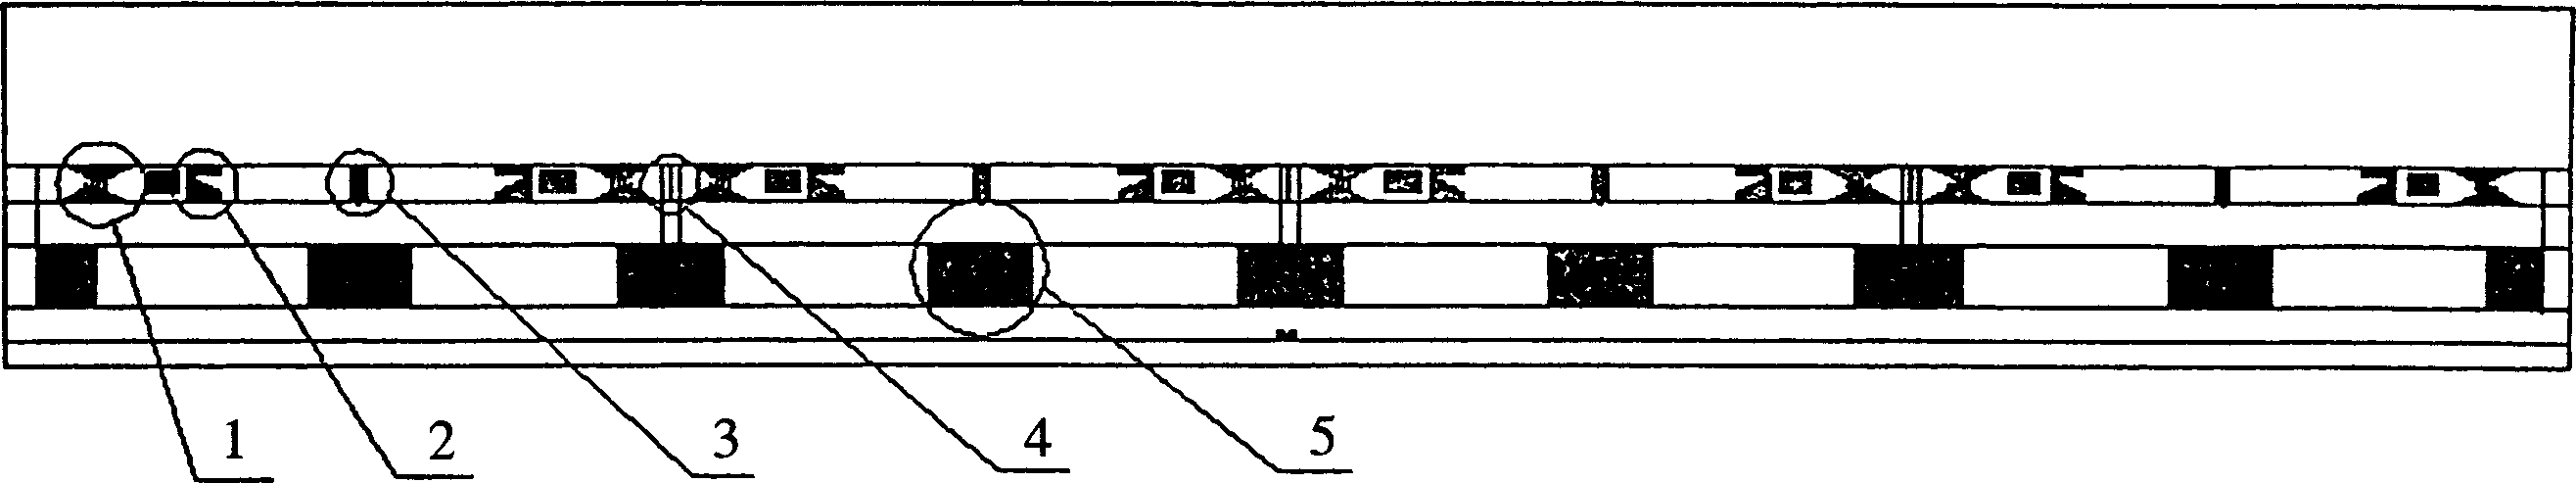 Device and method used for detecting flake material fluorescent image printing quality